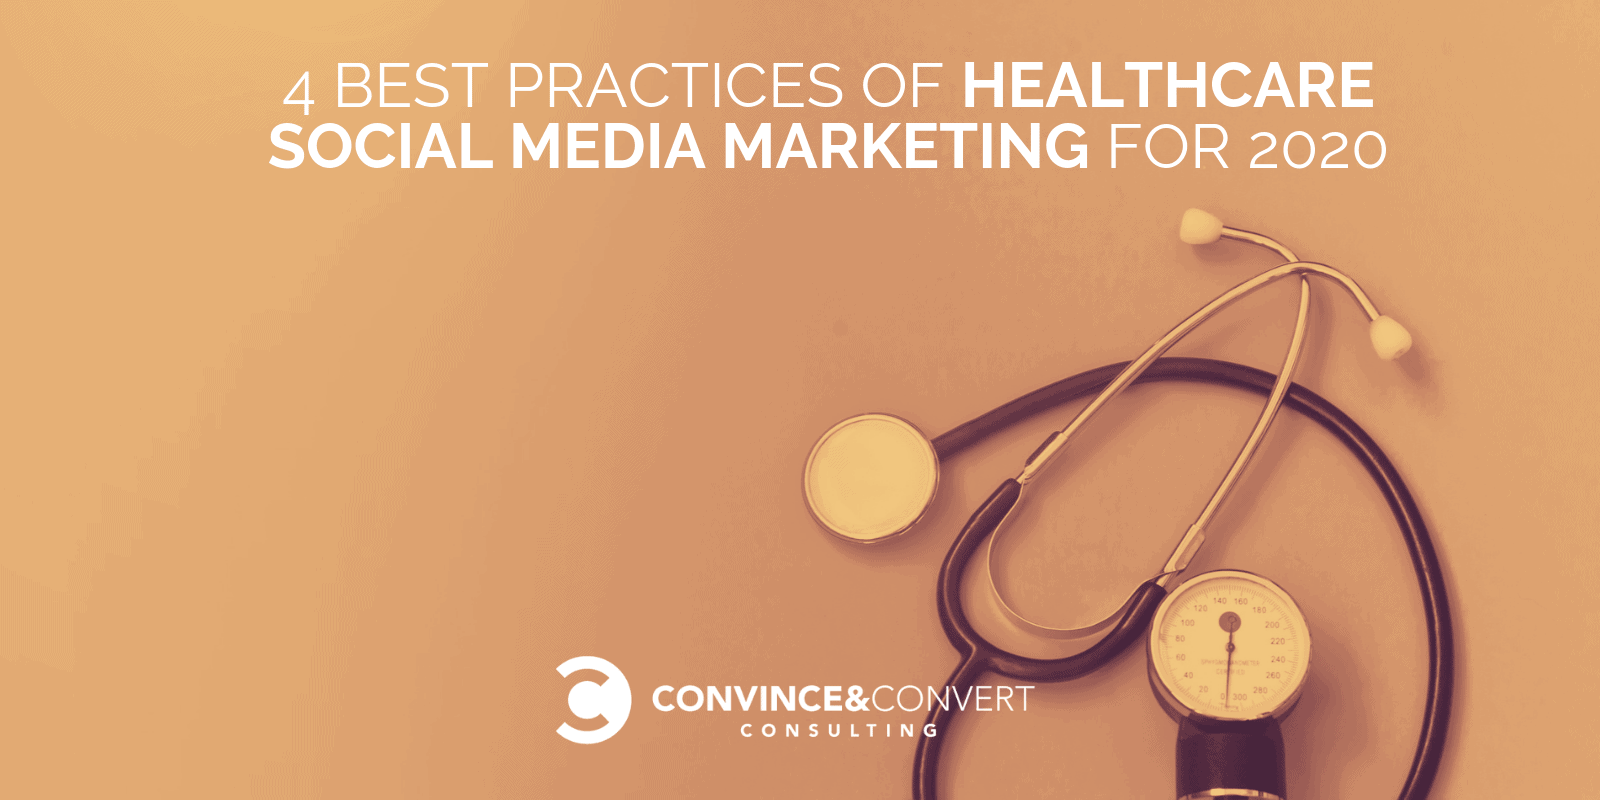 The 4 Best Practices of Healthcare Social Media Marketing for 2020